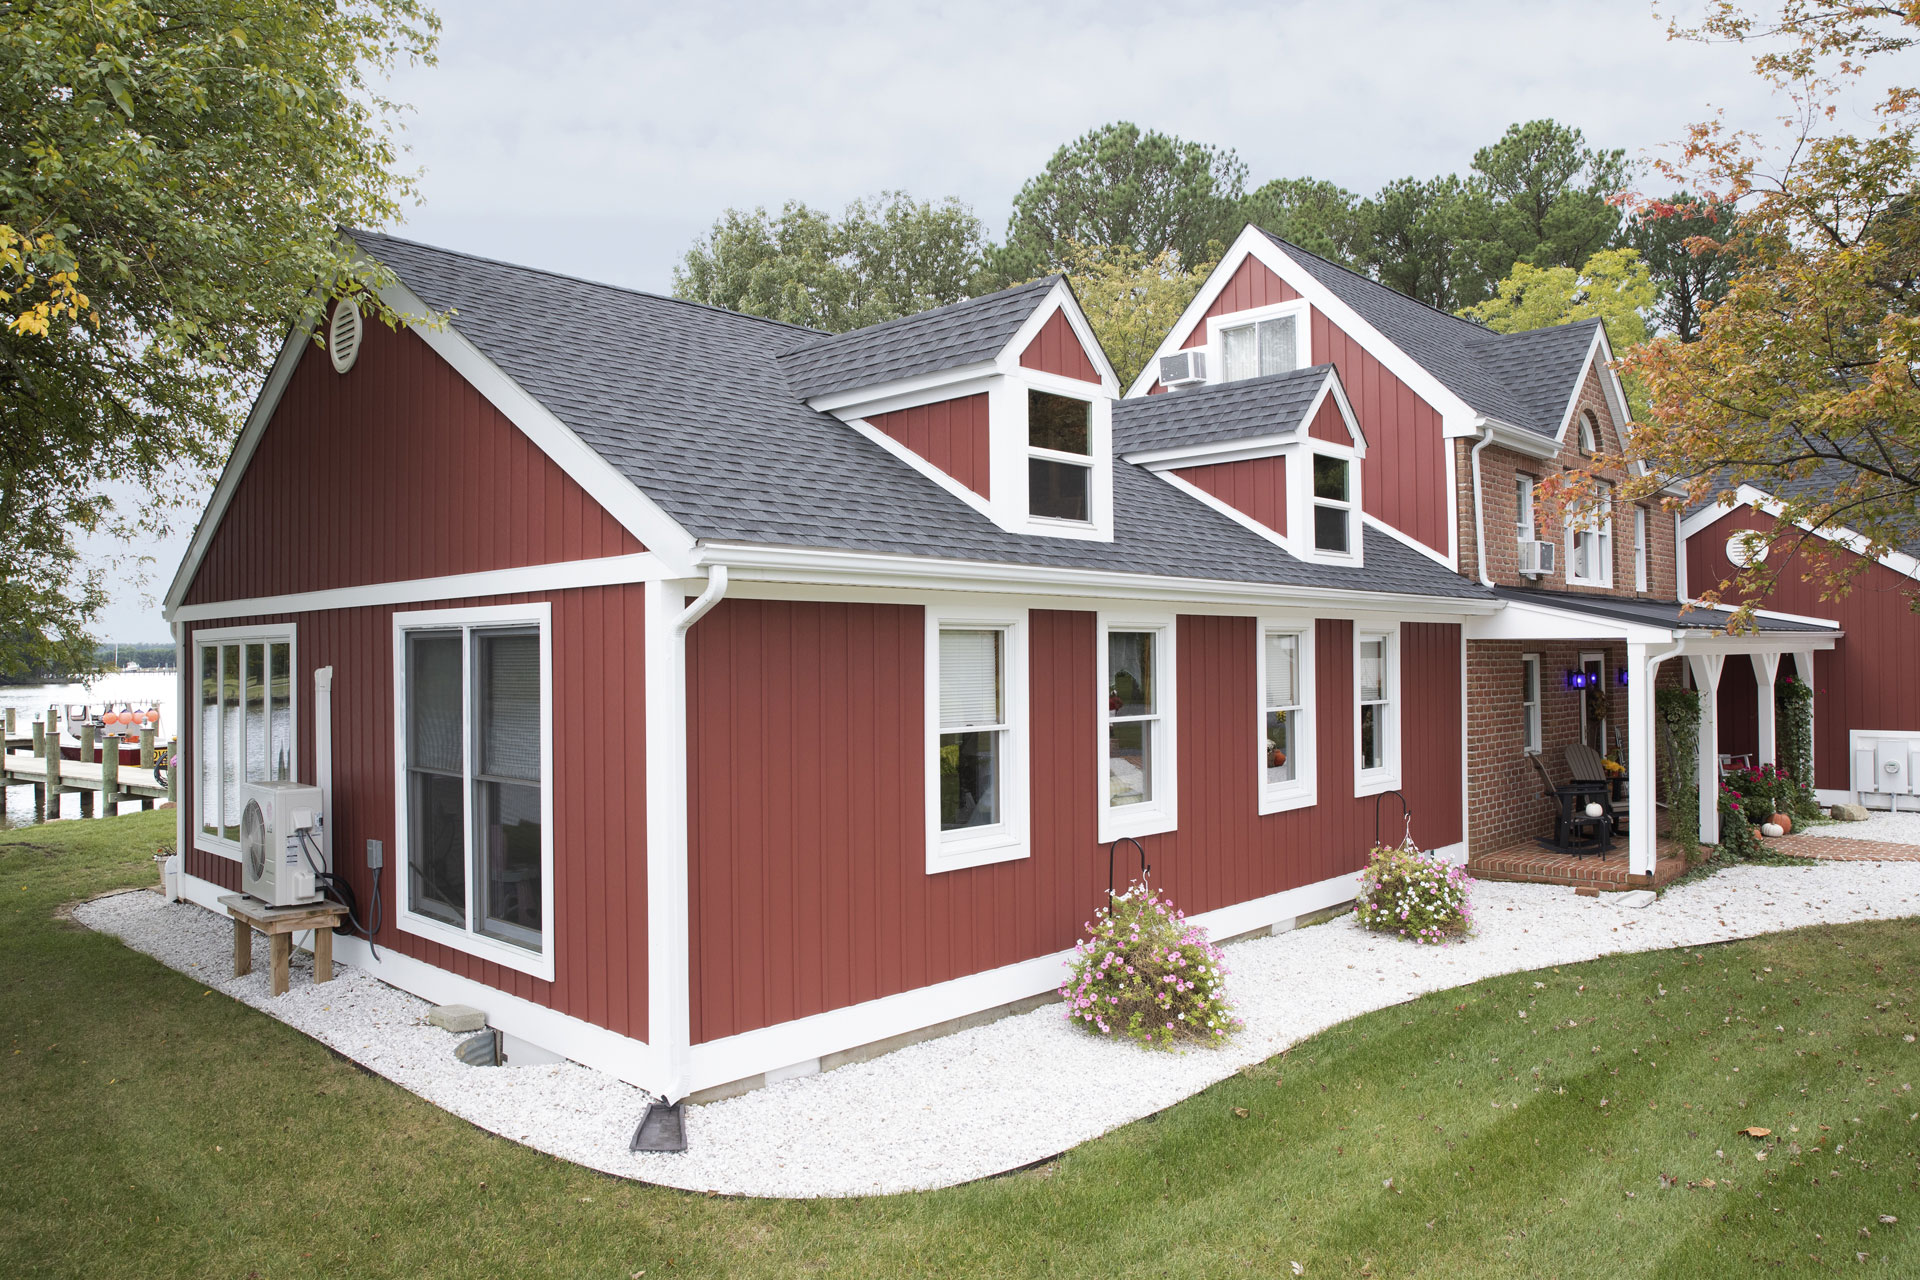 Celect Board and Batten Cellular Composite Siding in Carriage Red color